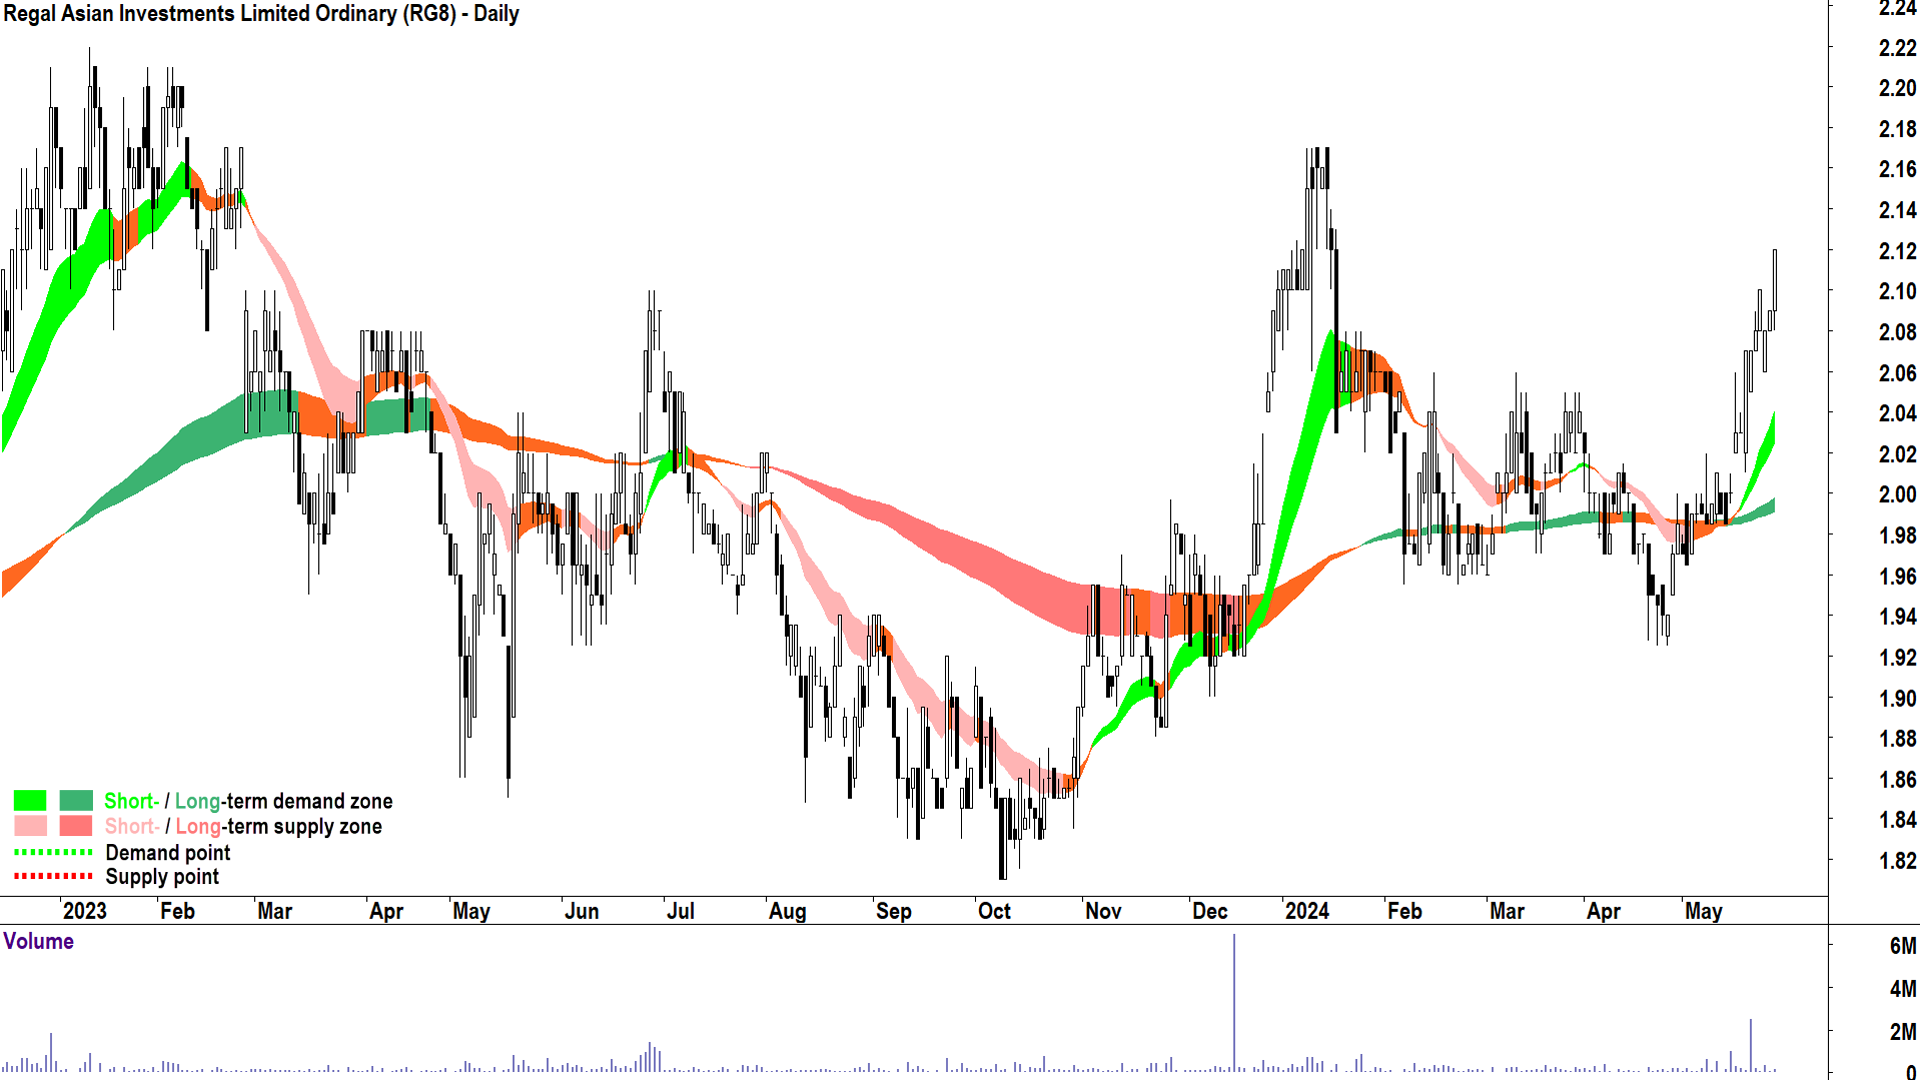 Regal Asian Investments (ASX-RG8) chart 28 May 2024